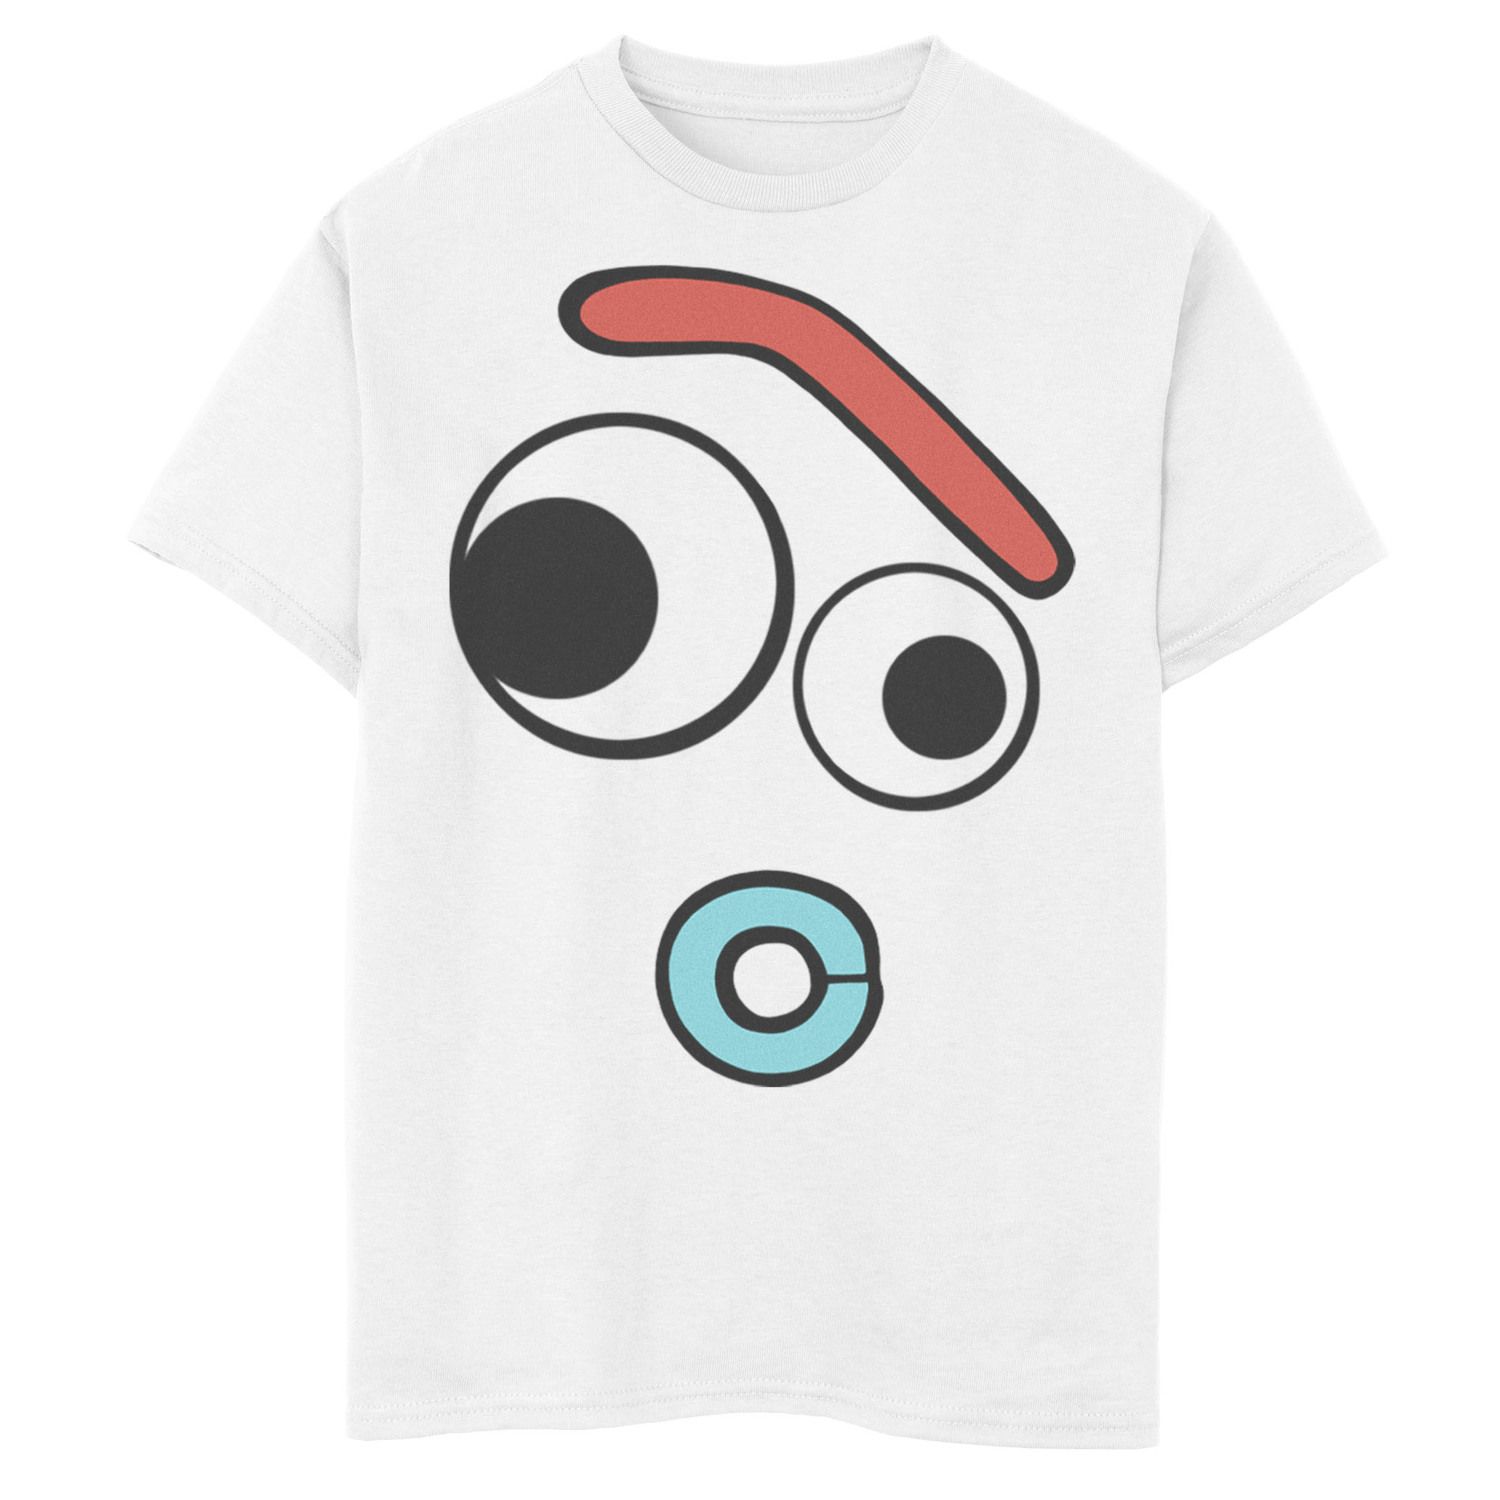 Image for Disney / Pixar Toy Story Boys 8-20 4 Forky Large Surprised Face Graphic Tee at Kohl's.